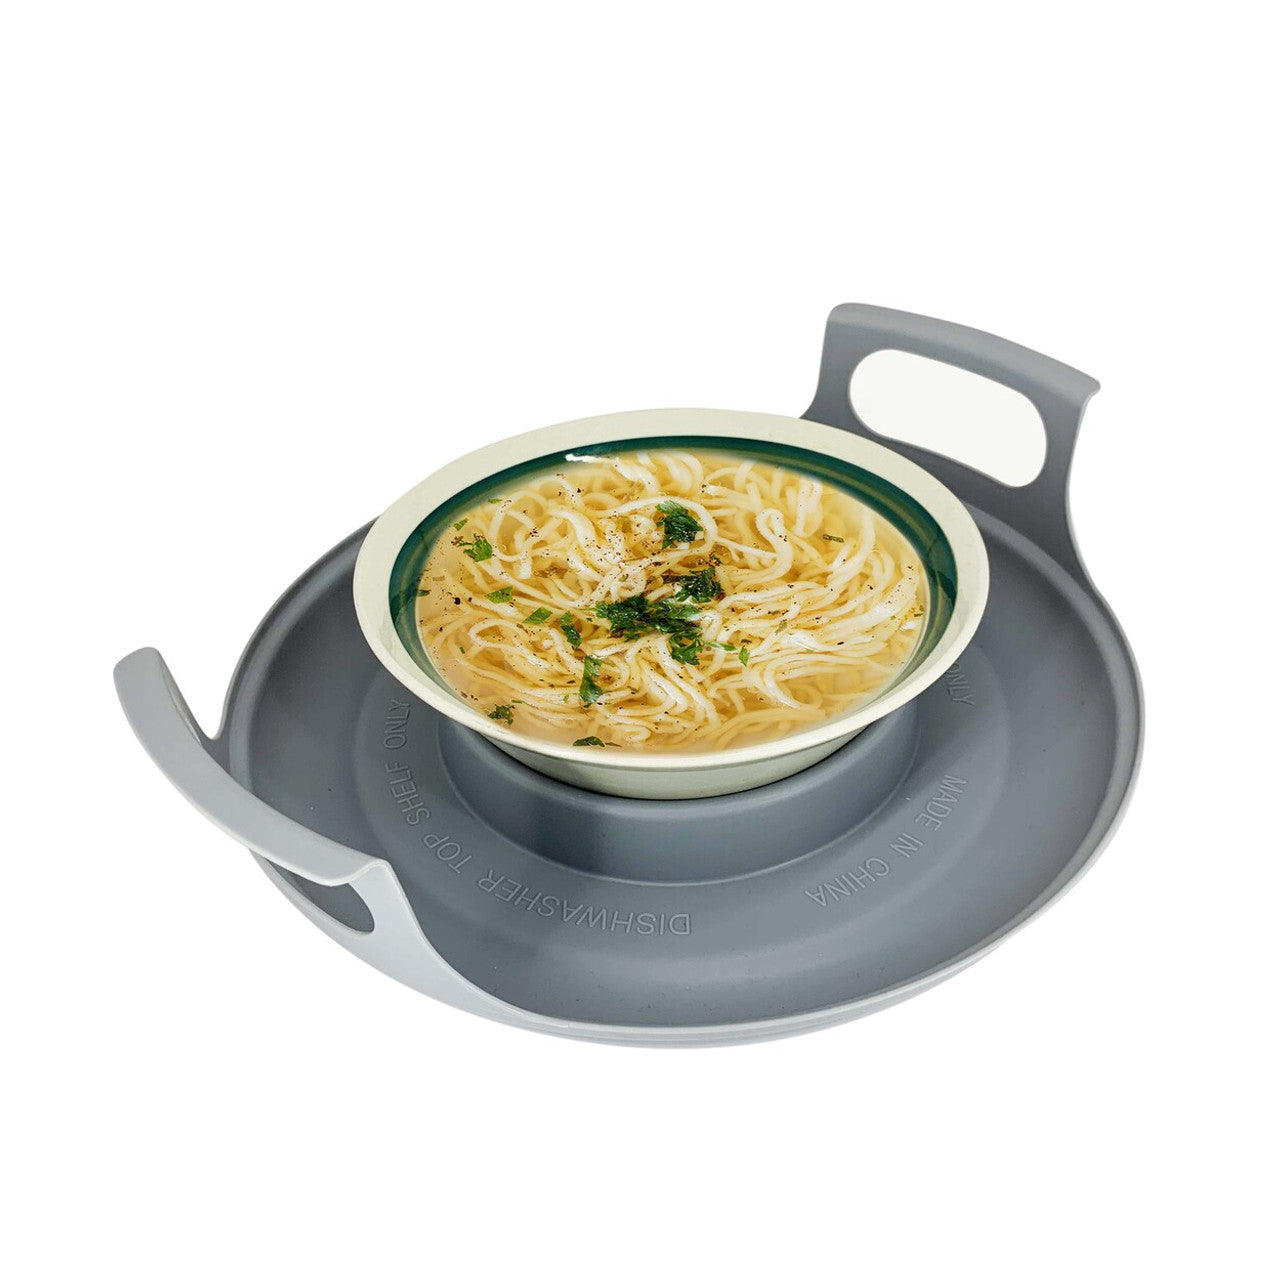 Microwave Caddy with a bowl of noodles on top – A versatile kitchen accessory suitable for individuals with visual impairments, accommodating plates or bowls from 5 to 10 inches in diameter, providing safe handling of hot microwave dishes